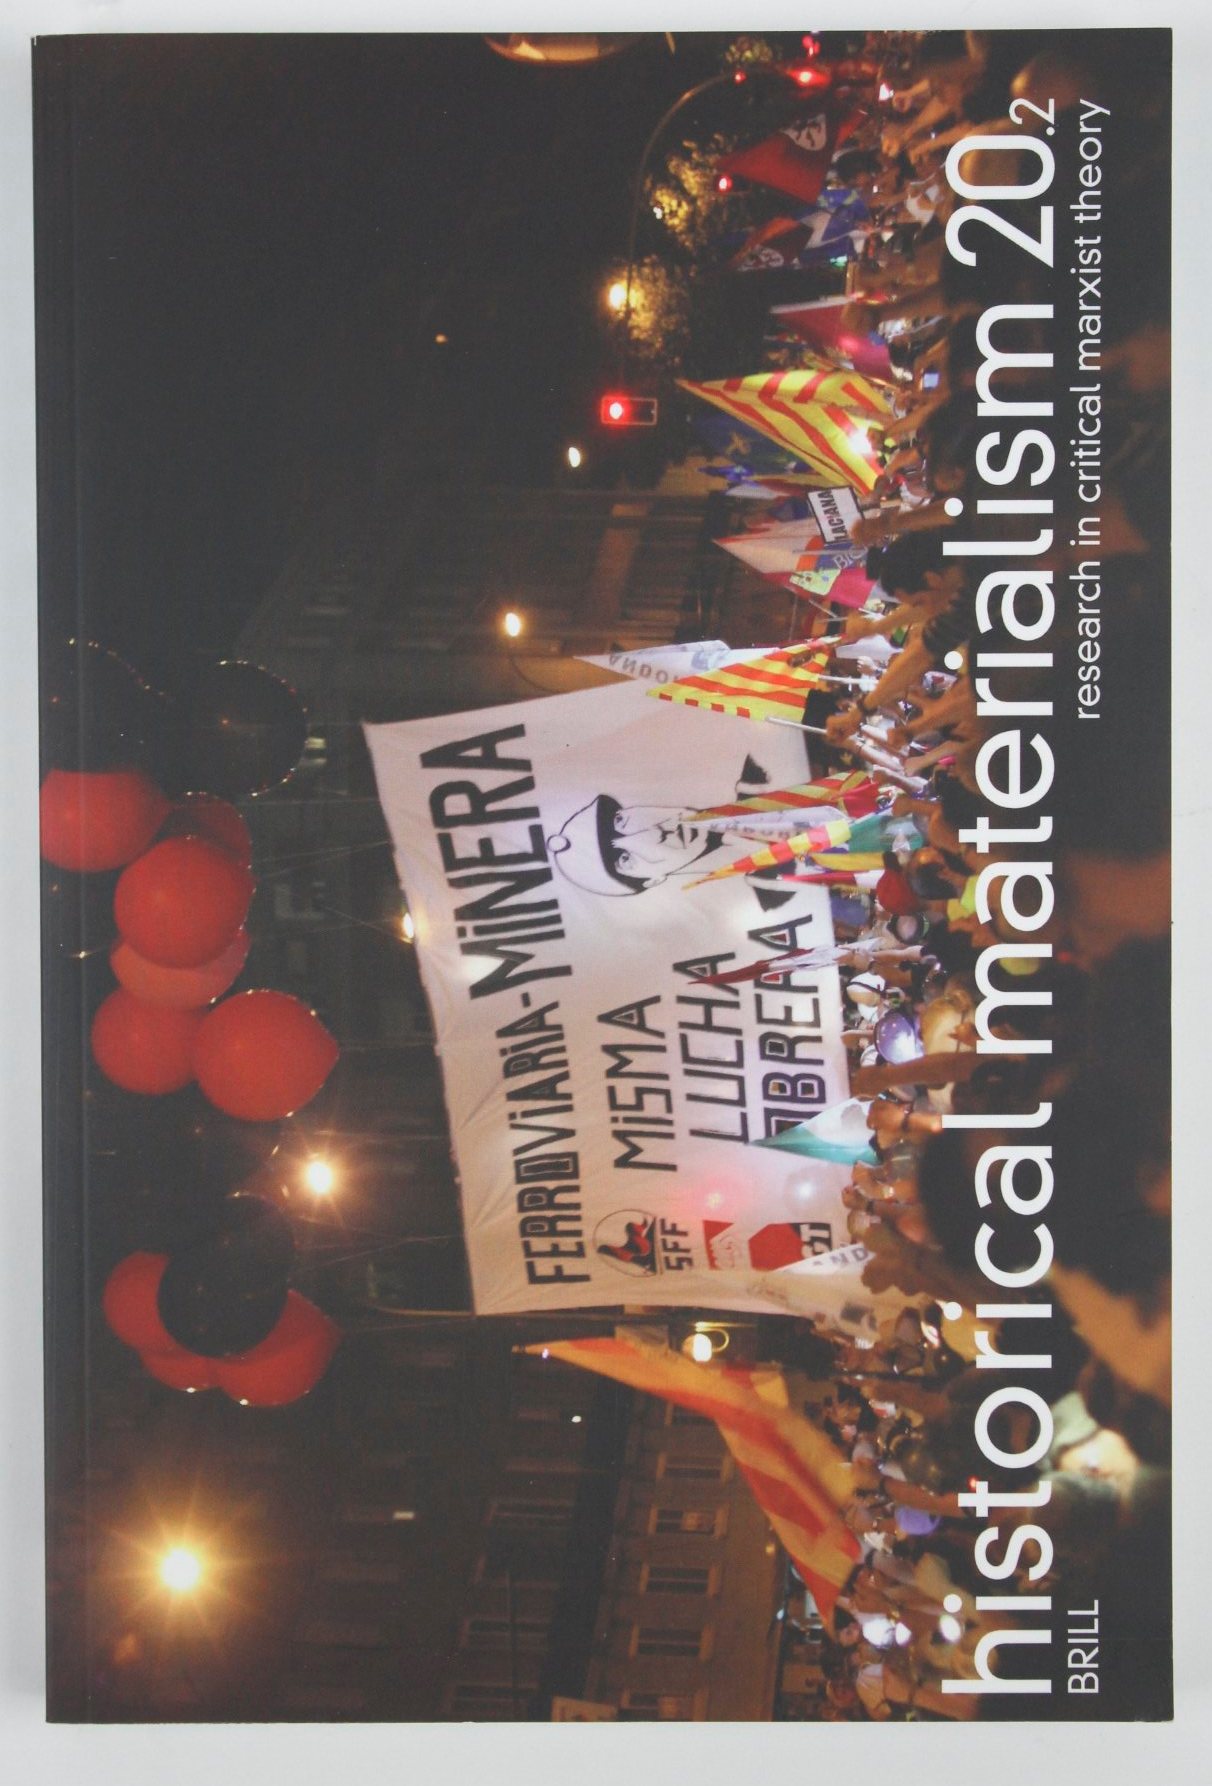 Historical Materialism 20.2 (2012) Research in Critical Marxist Theory - BRILL